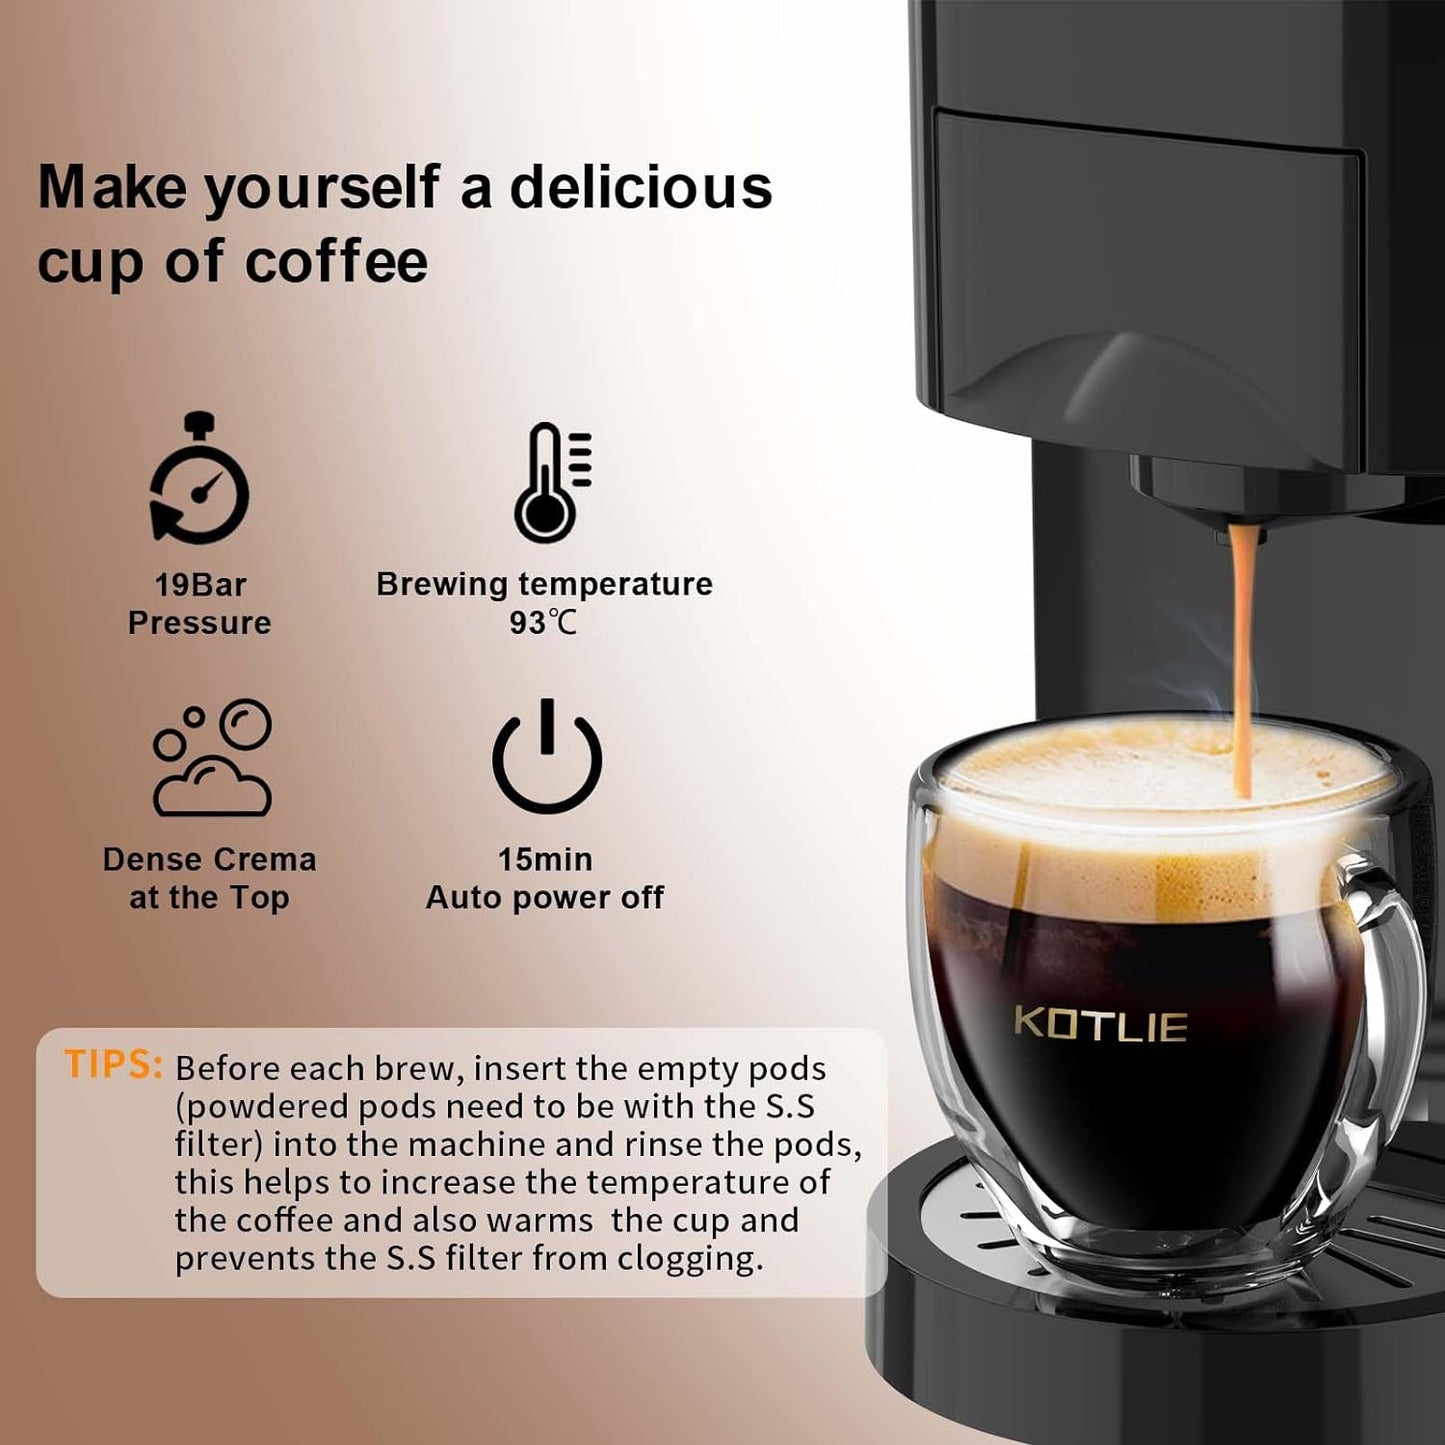 KOTLIE 513F 19Bar Espresso Machine,5in1 Single Serve Coffee Maker for Nespresso Original/Dolce Gusto/K cups/L'OR/Ground Coffee/illy 44mm ESE,Hot&Cold Brew Coffee Machine,Level 7 water volume